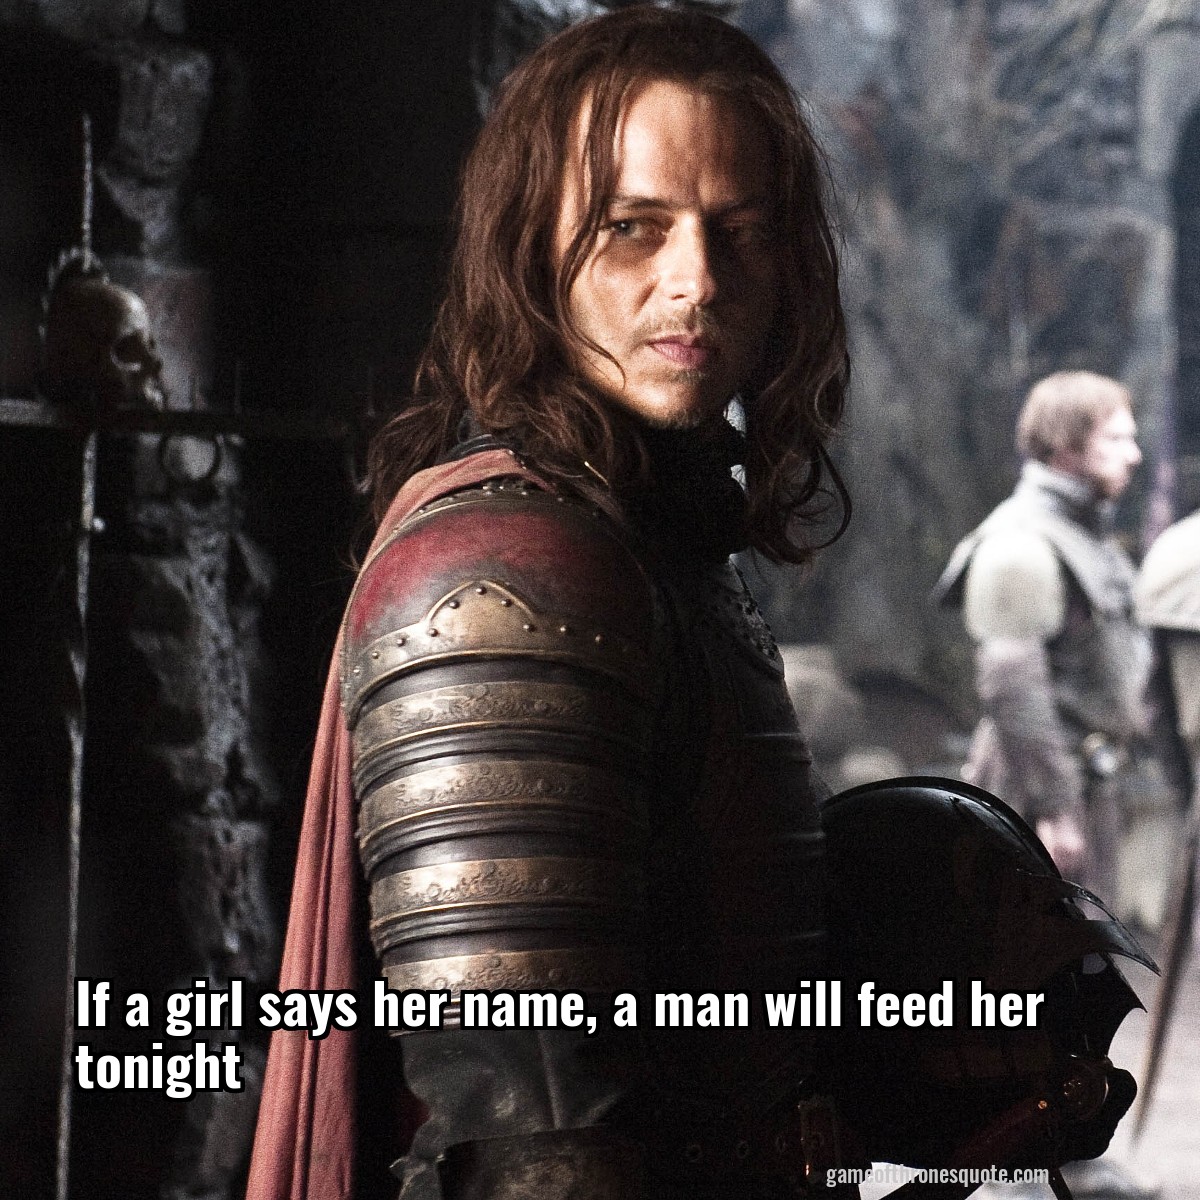 If a girl says her name, a man will feed her tonight